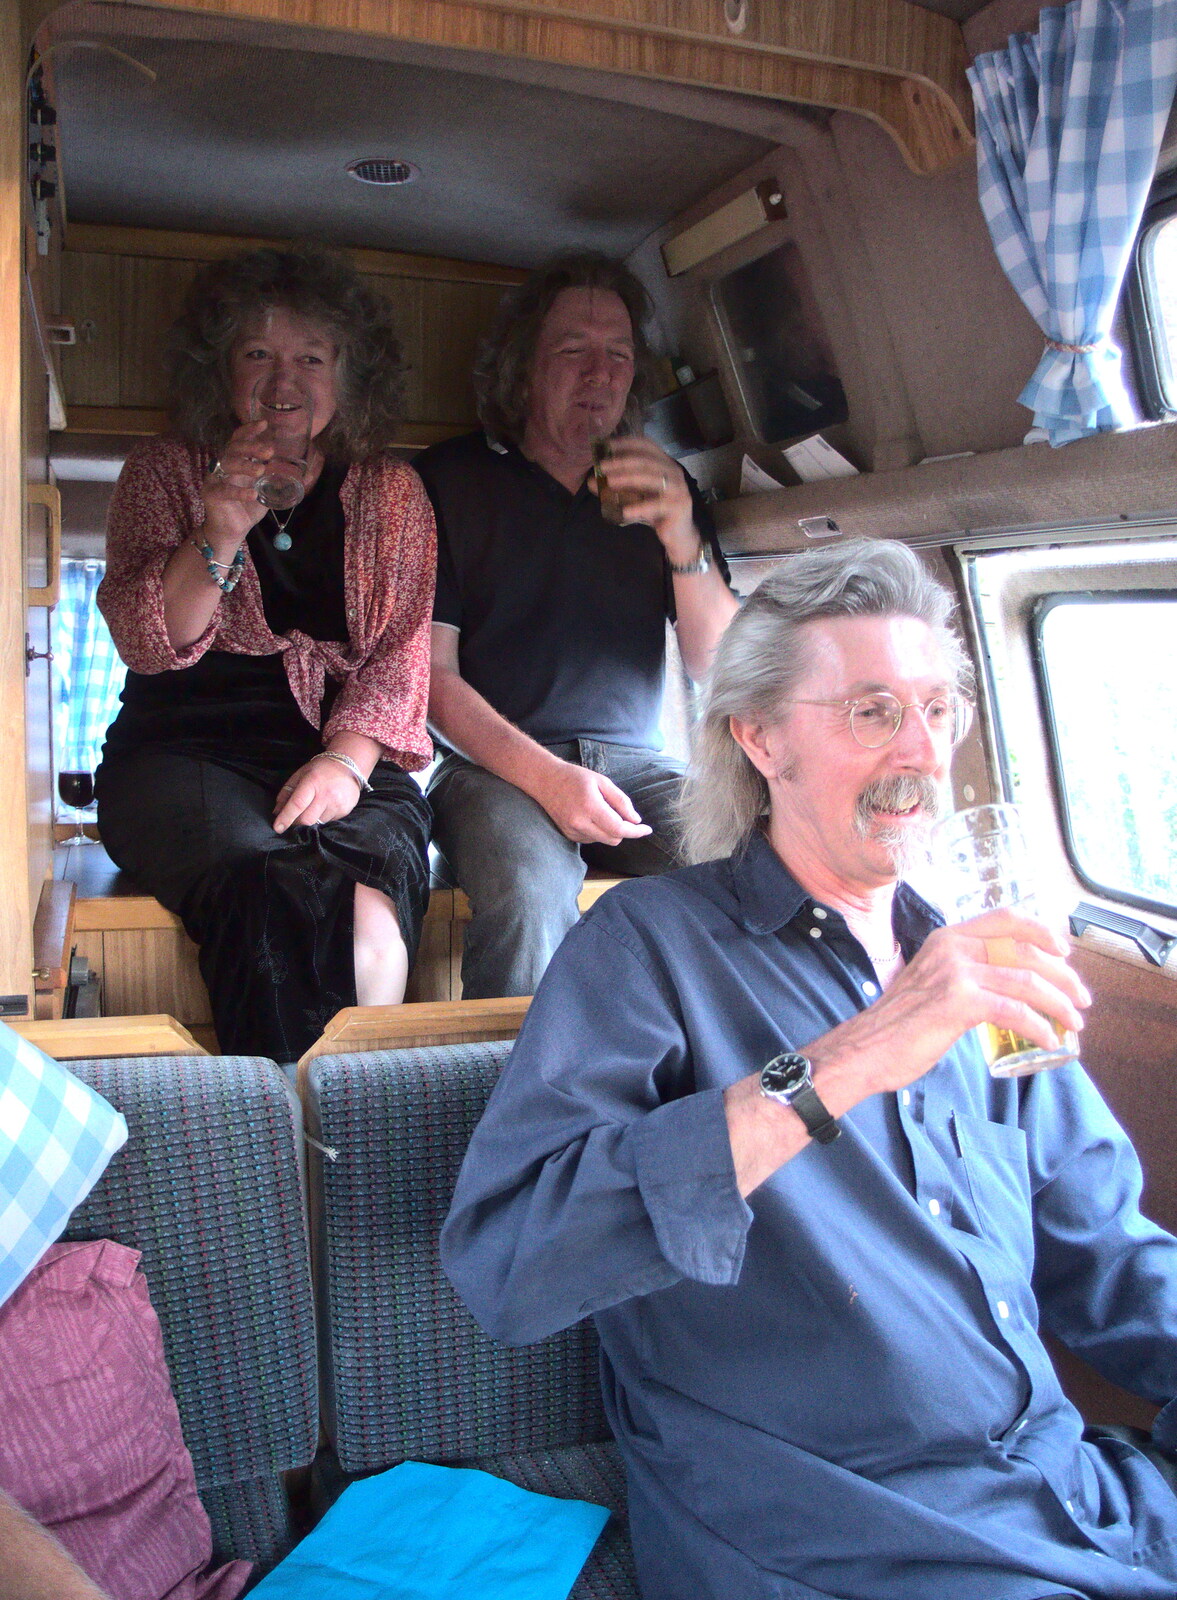 The band cram in to the van from Soph the Roph's Birthday and The BBs at Pulham, Norfolk - 22nd July 2015